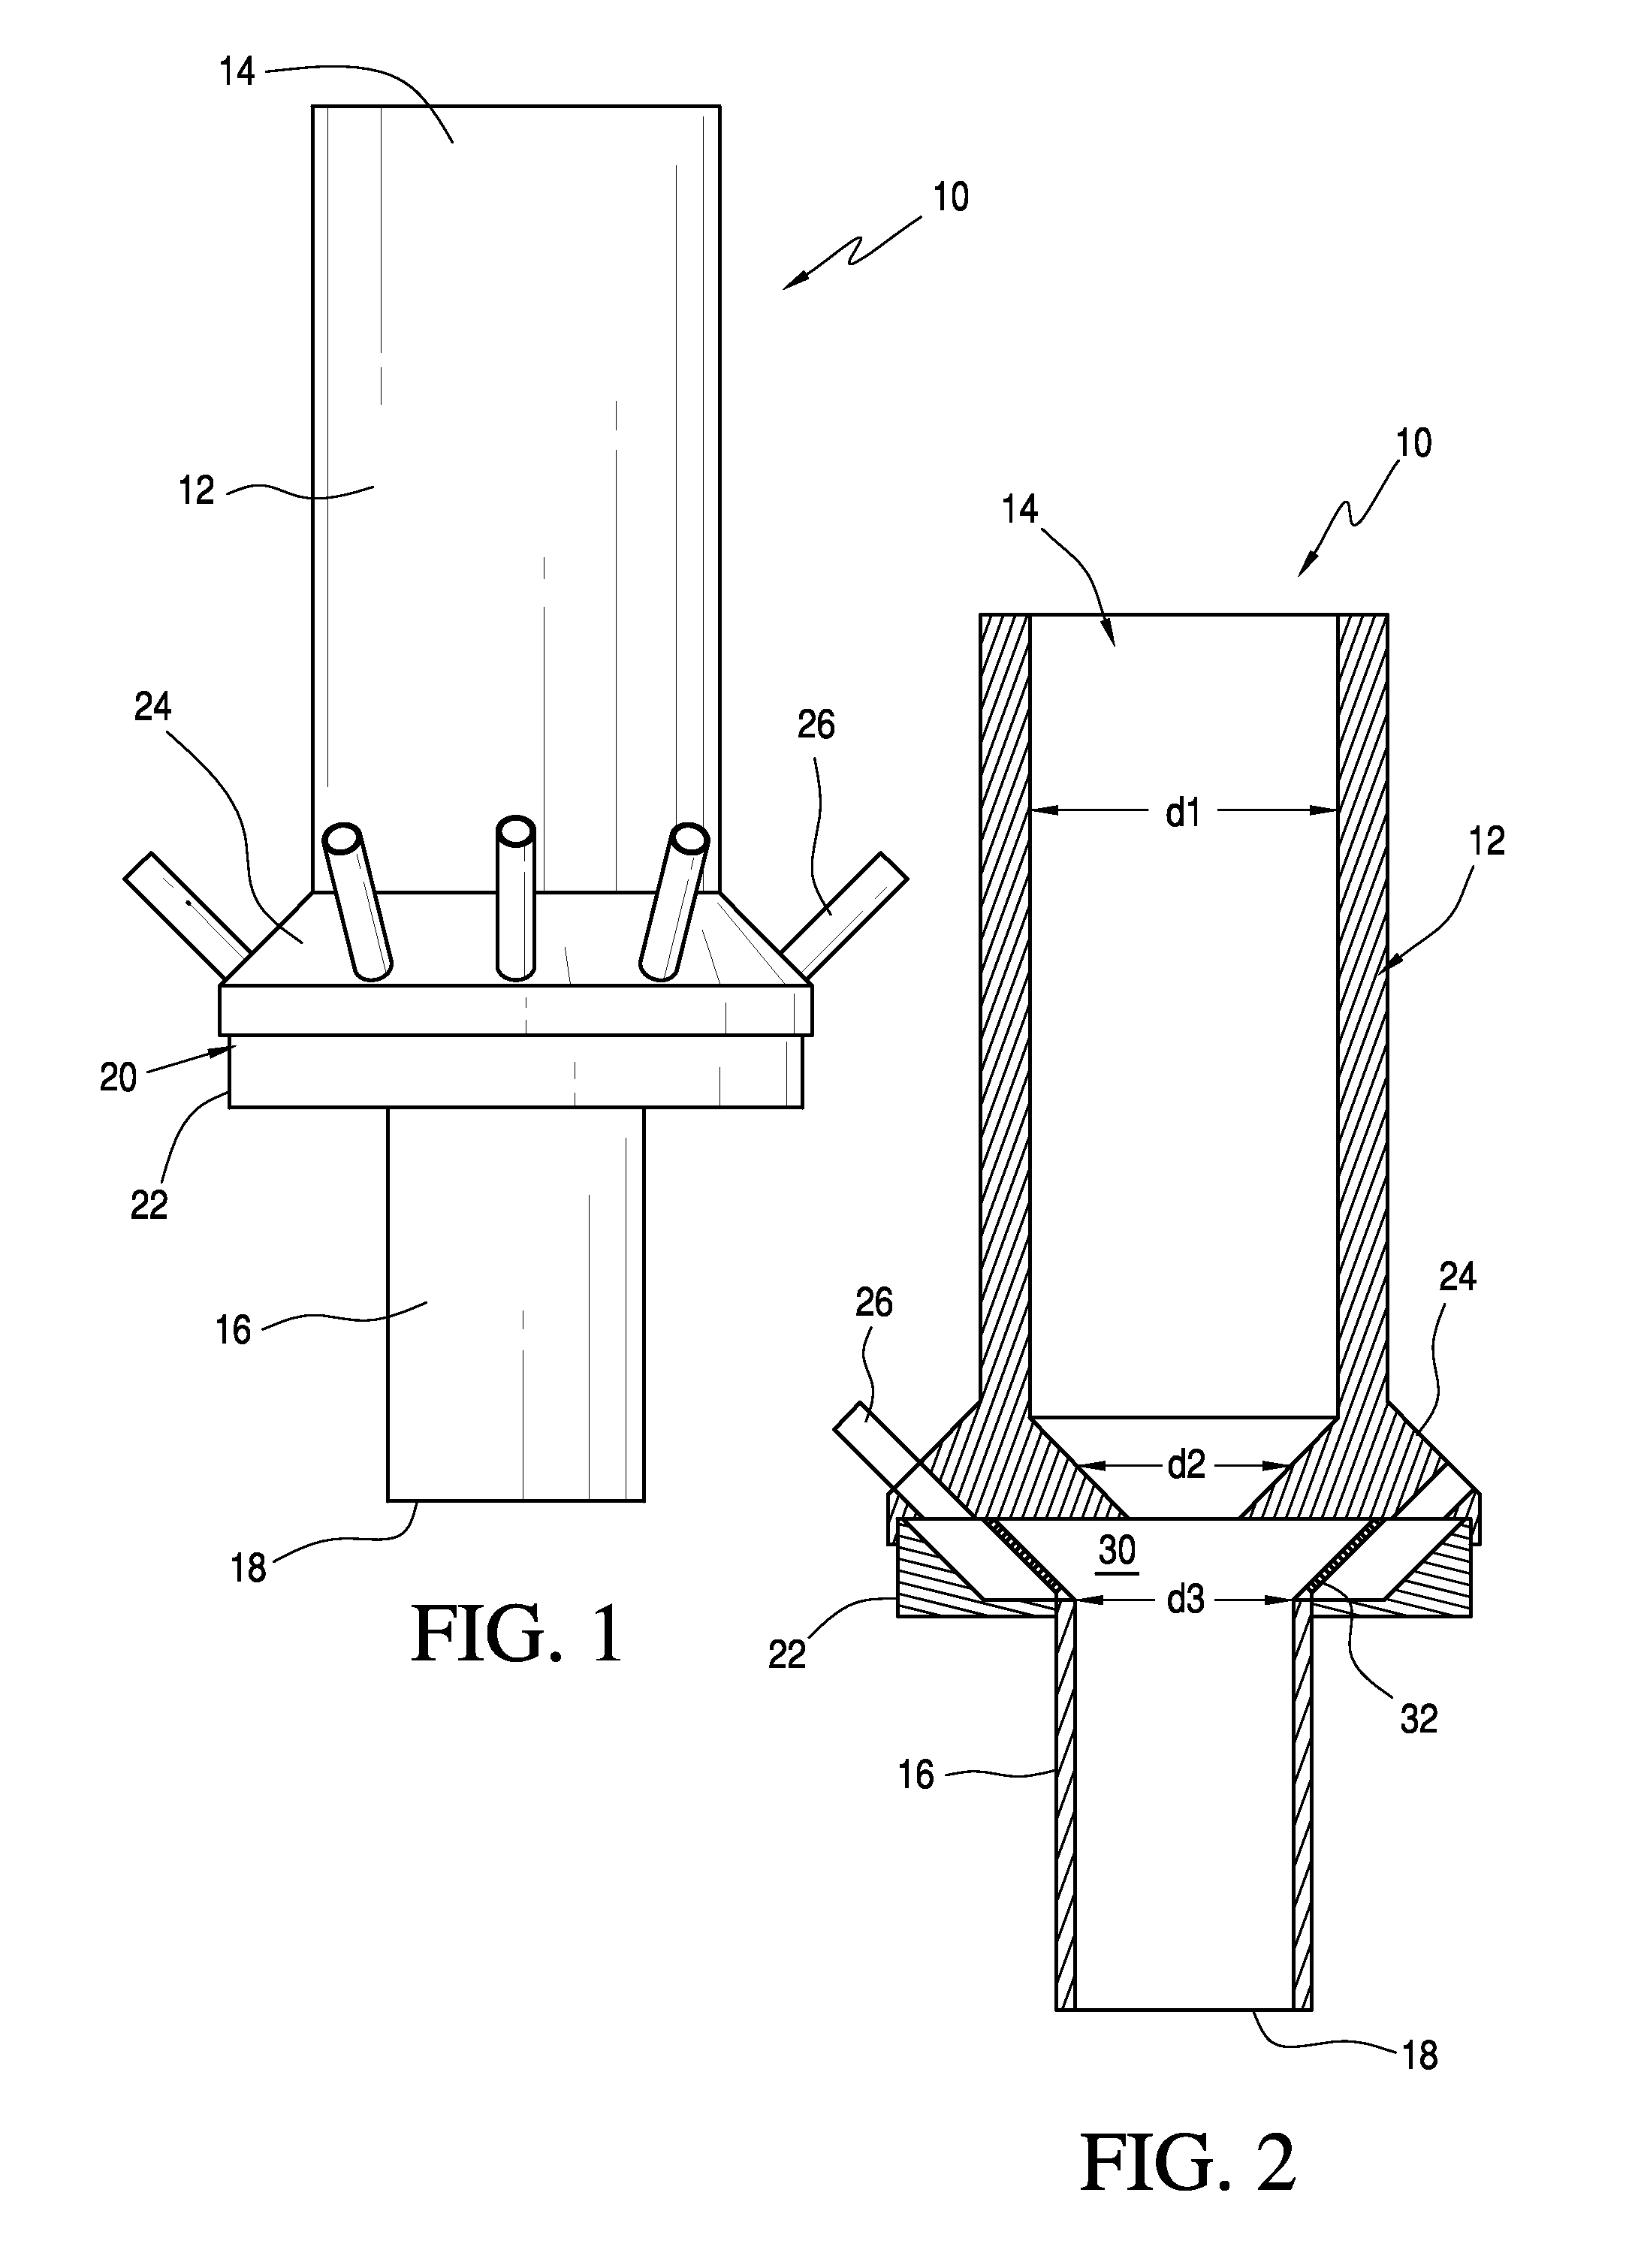 Method and apparatus for incorporating a low pressure fluid into a high pressure fluid, and increasing the efficiency of the rankine cycle in a power plant